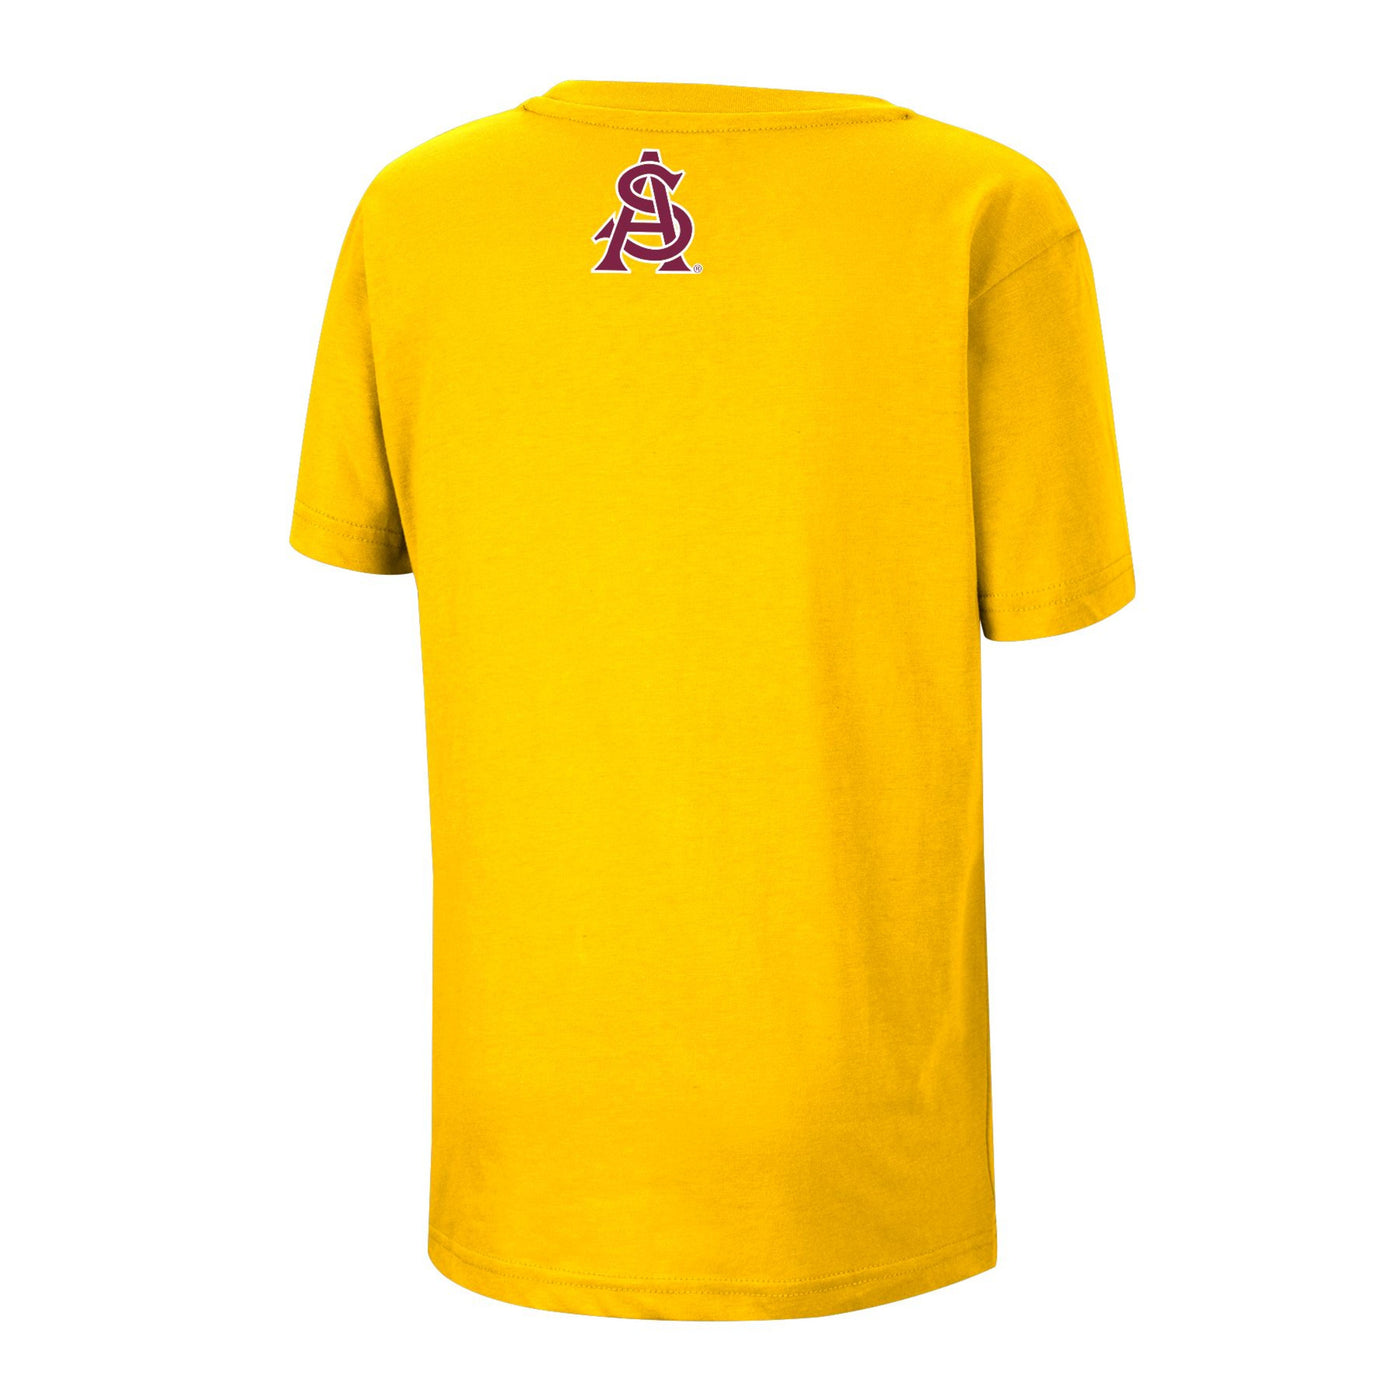 ASU gold youth tee with an interlocking 'A' and 'S' below the collar